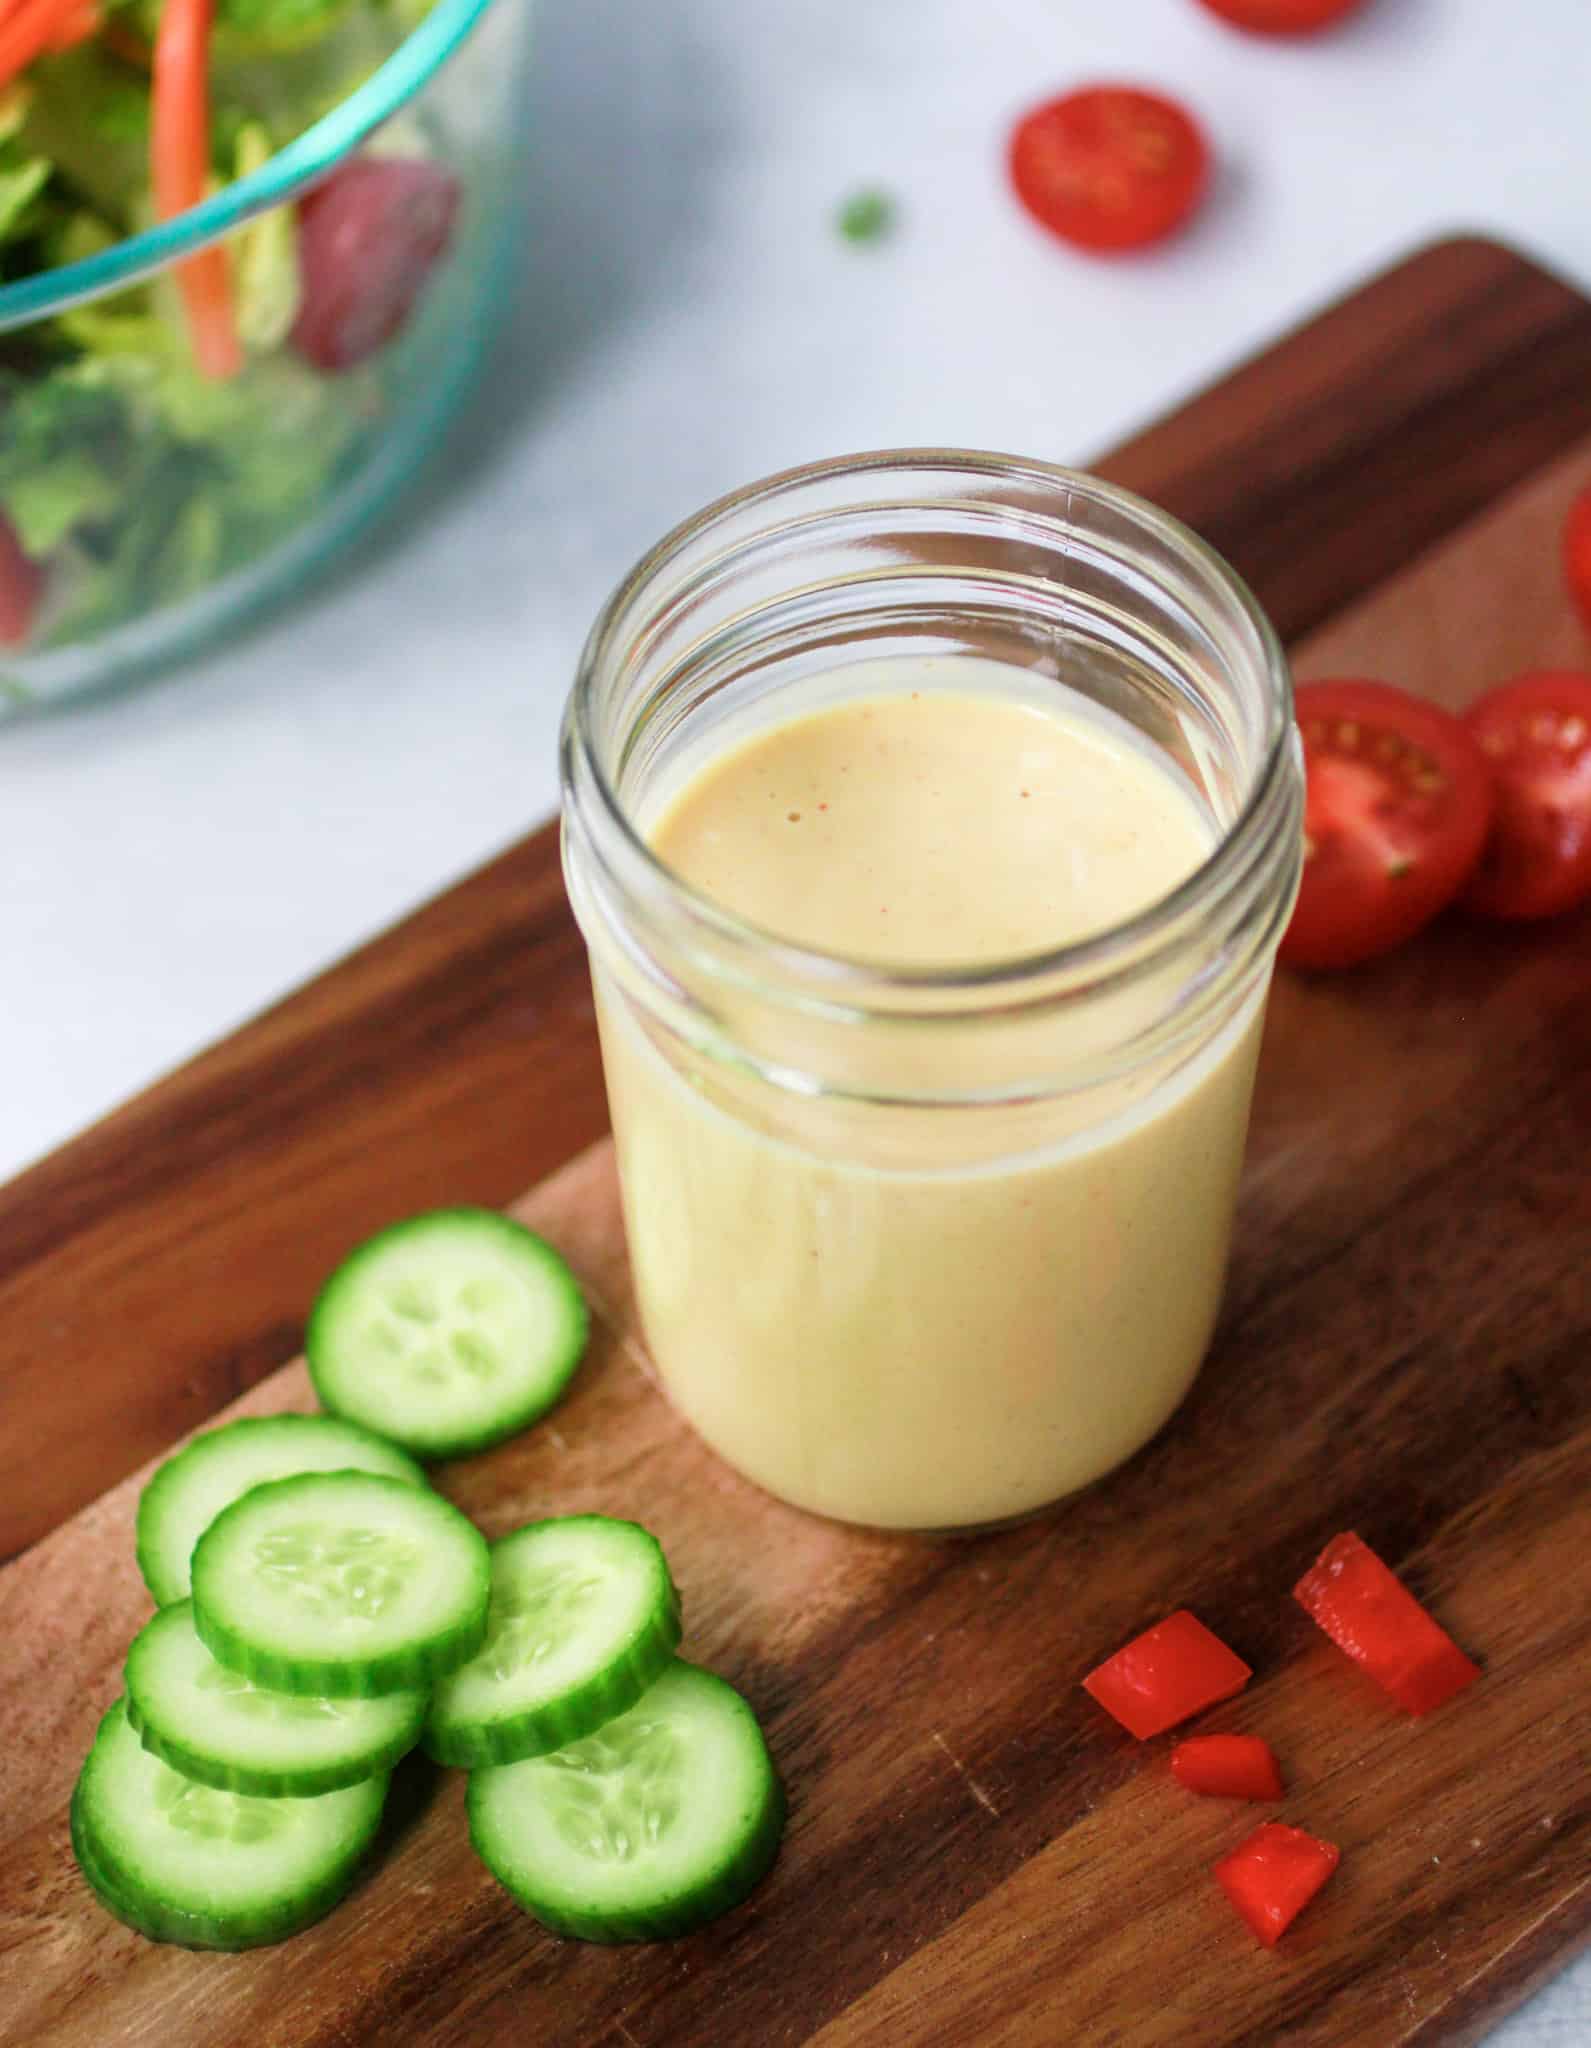 Honey mustard dressing in a jar with vegetables on a cutting board.